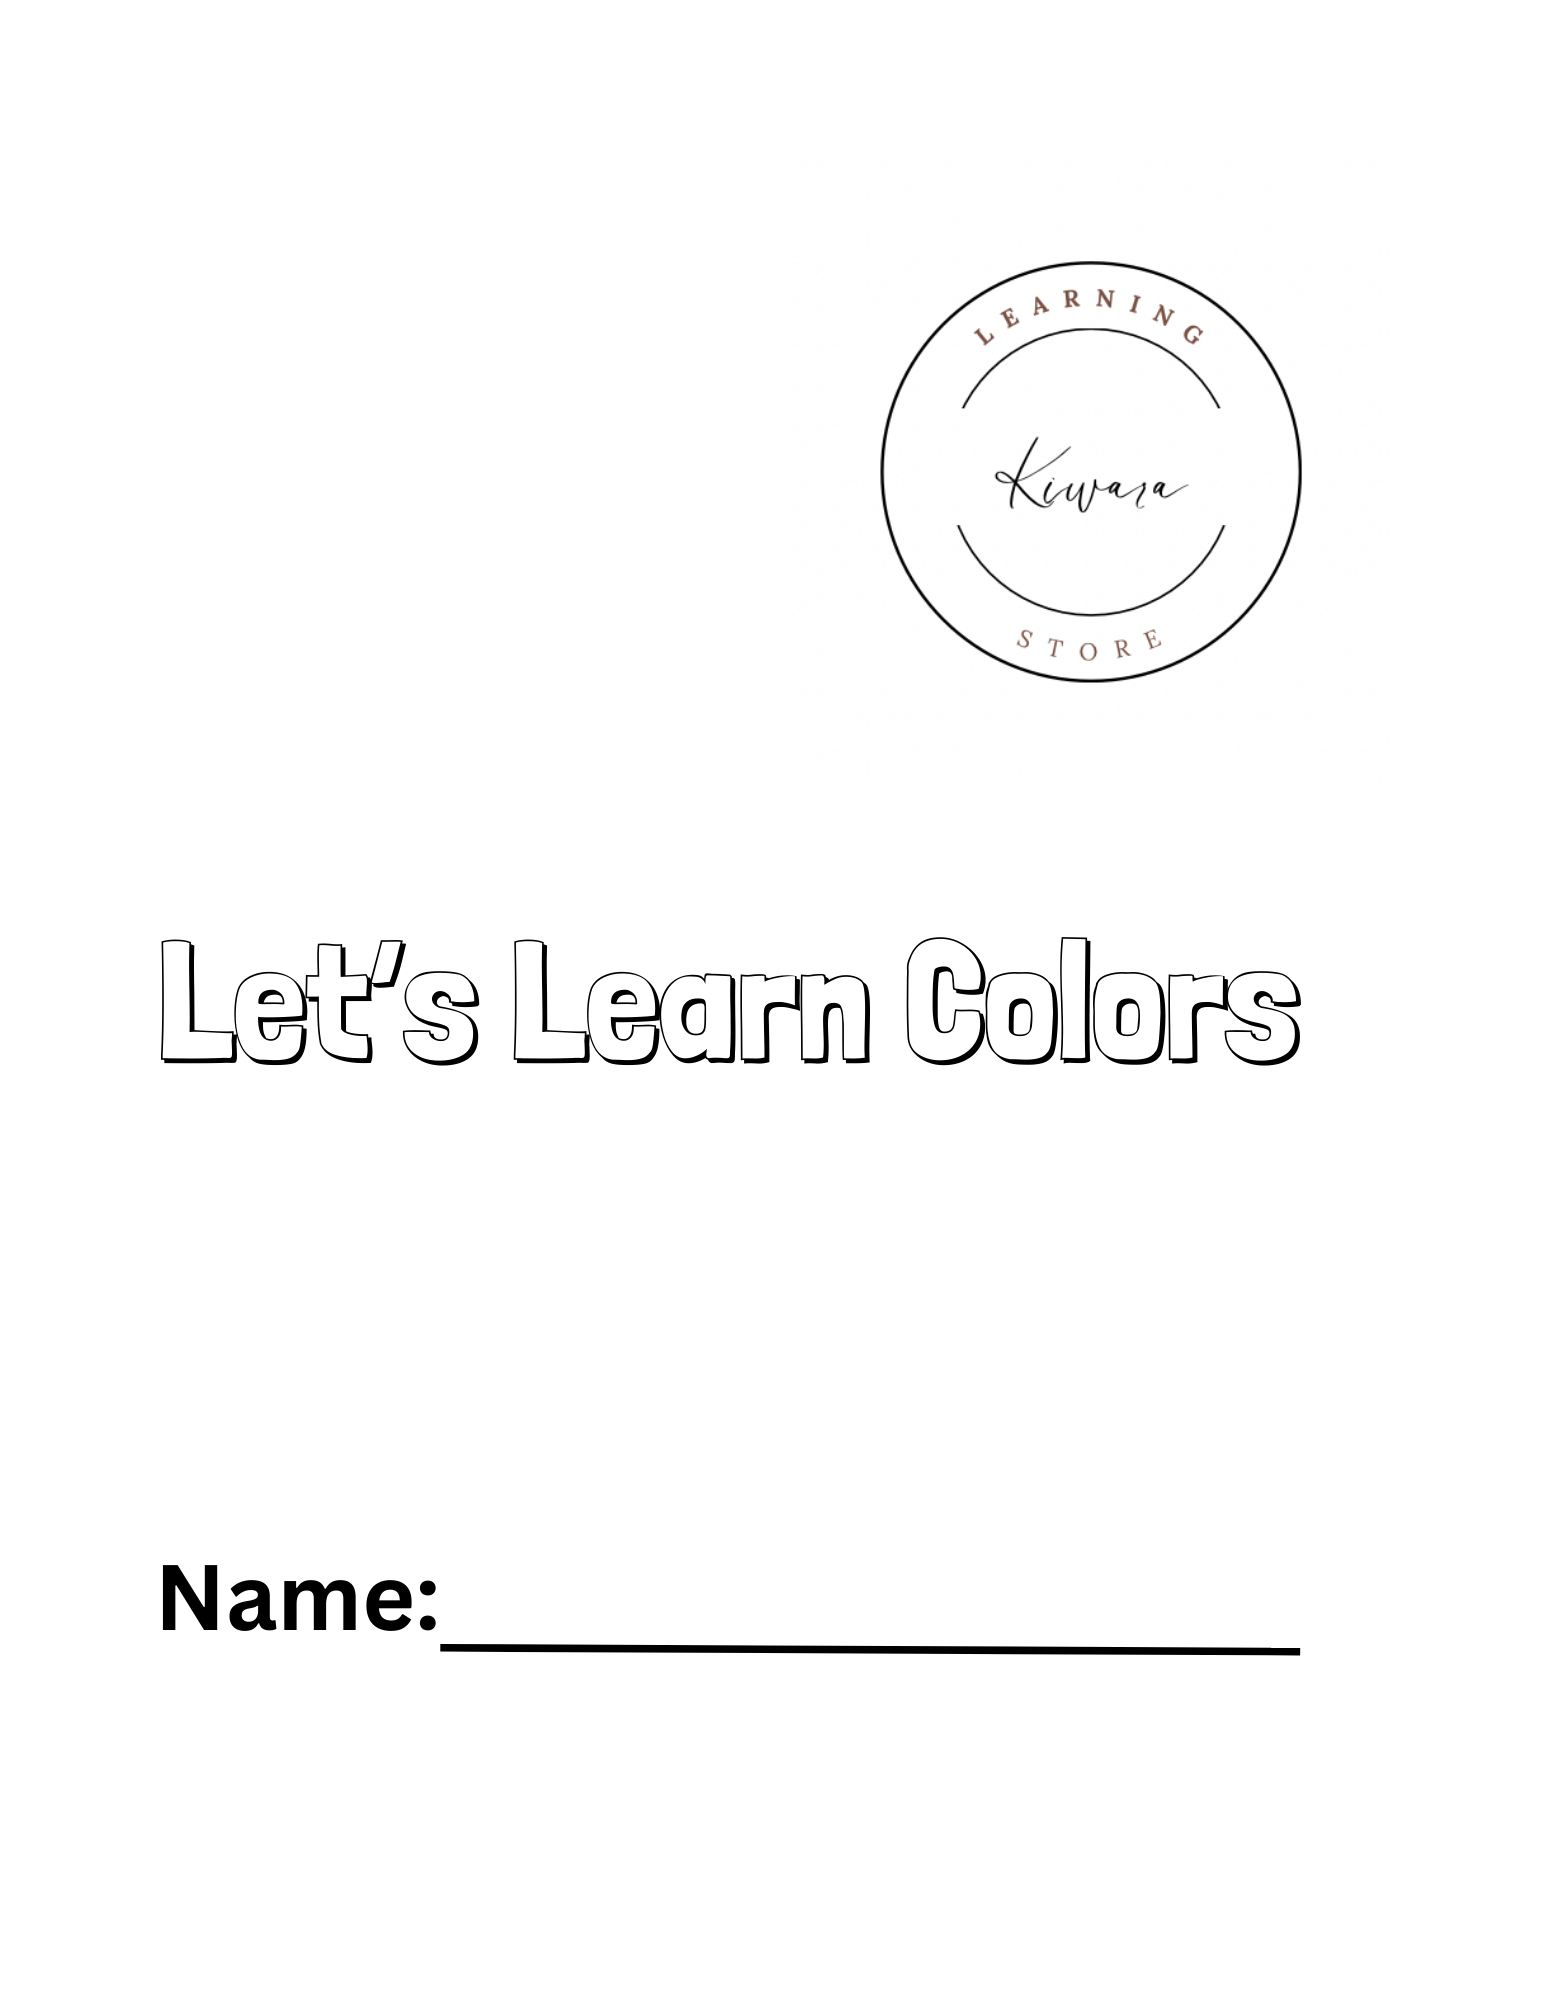 Let’s Learn Colors